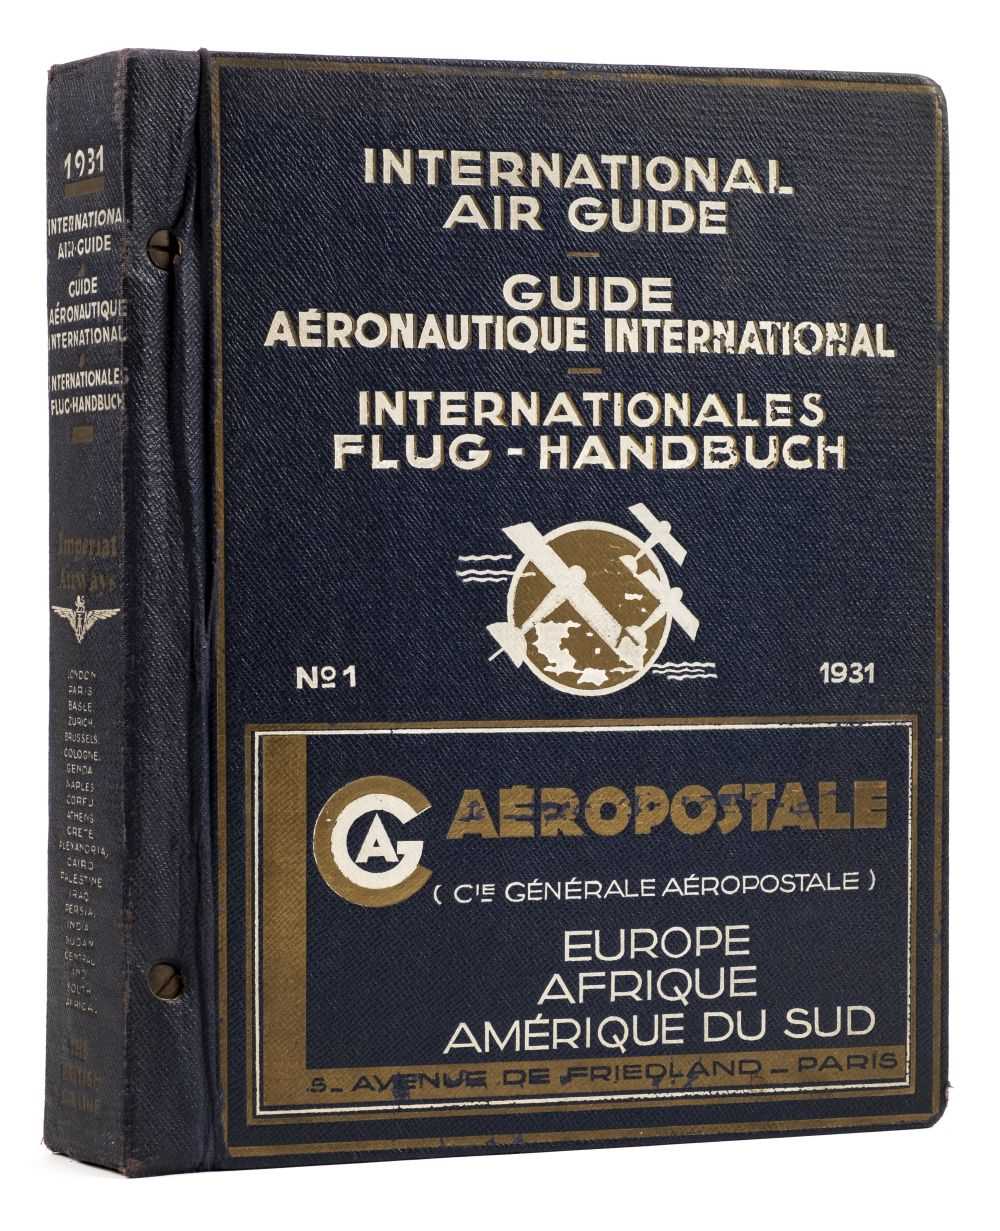 Lot 82 - Civil Aviation. International Air Guide. The Reference Book on Civil and Commercial Aviation